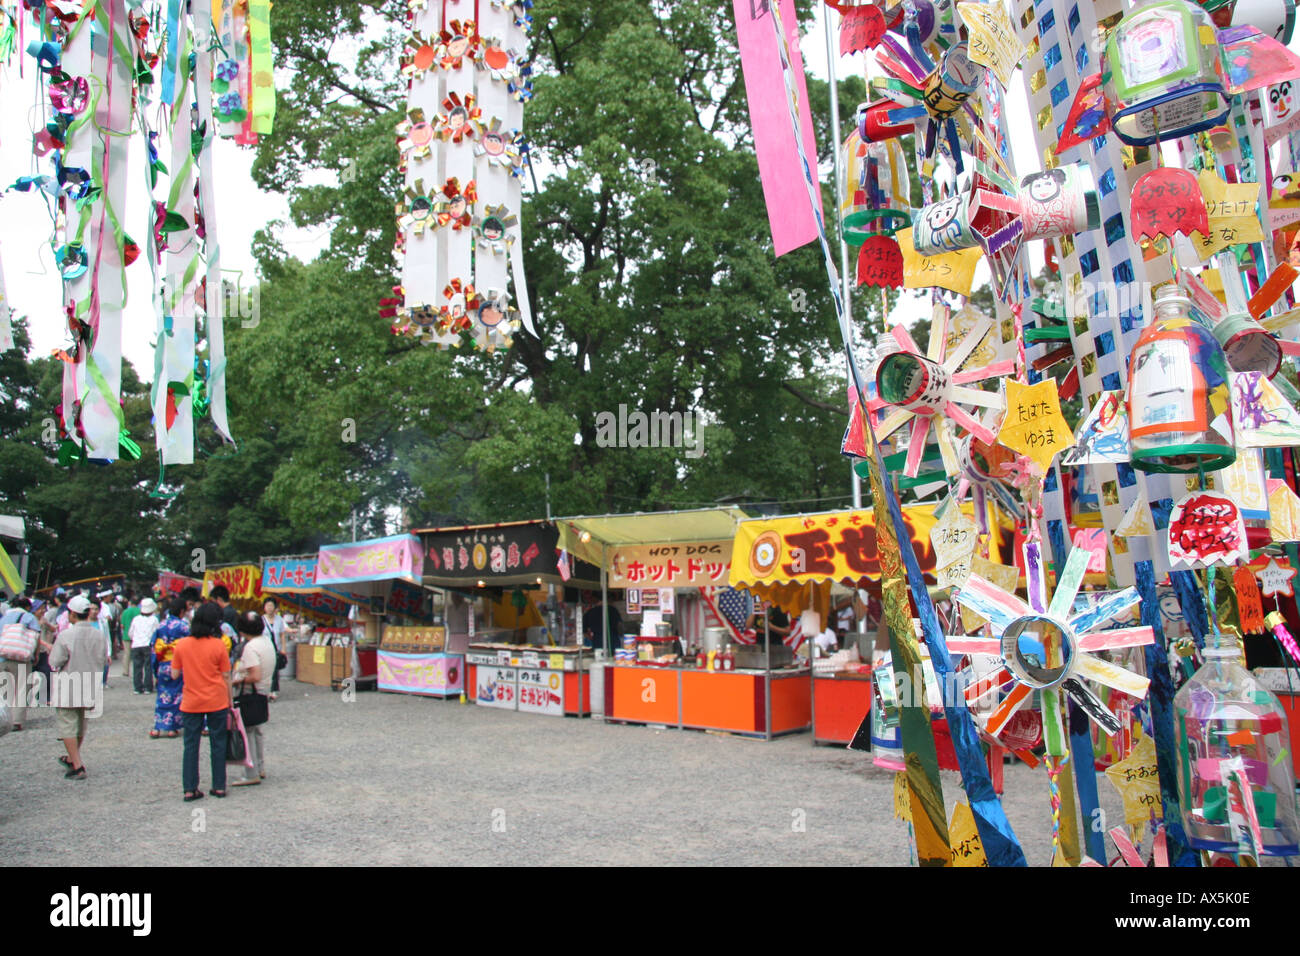 Stalls selling food in the grounds of a shinto shrine during a summer festival in Japan Stock Photo